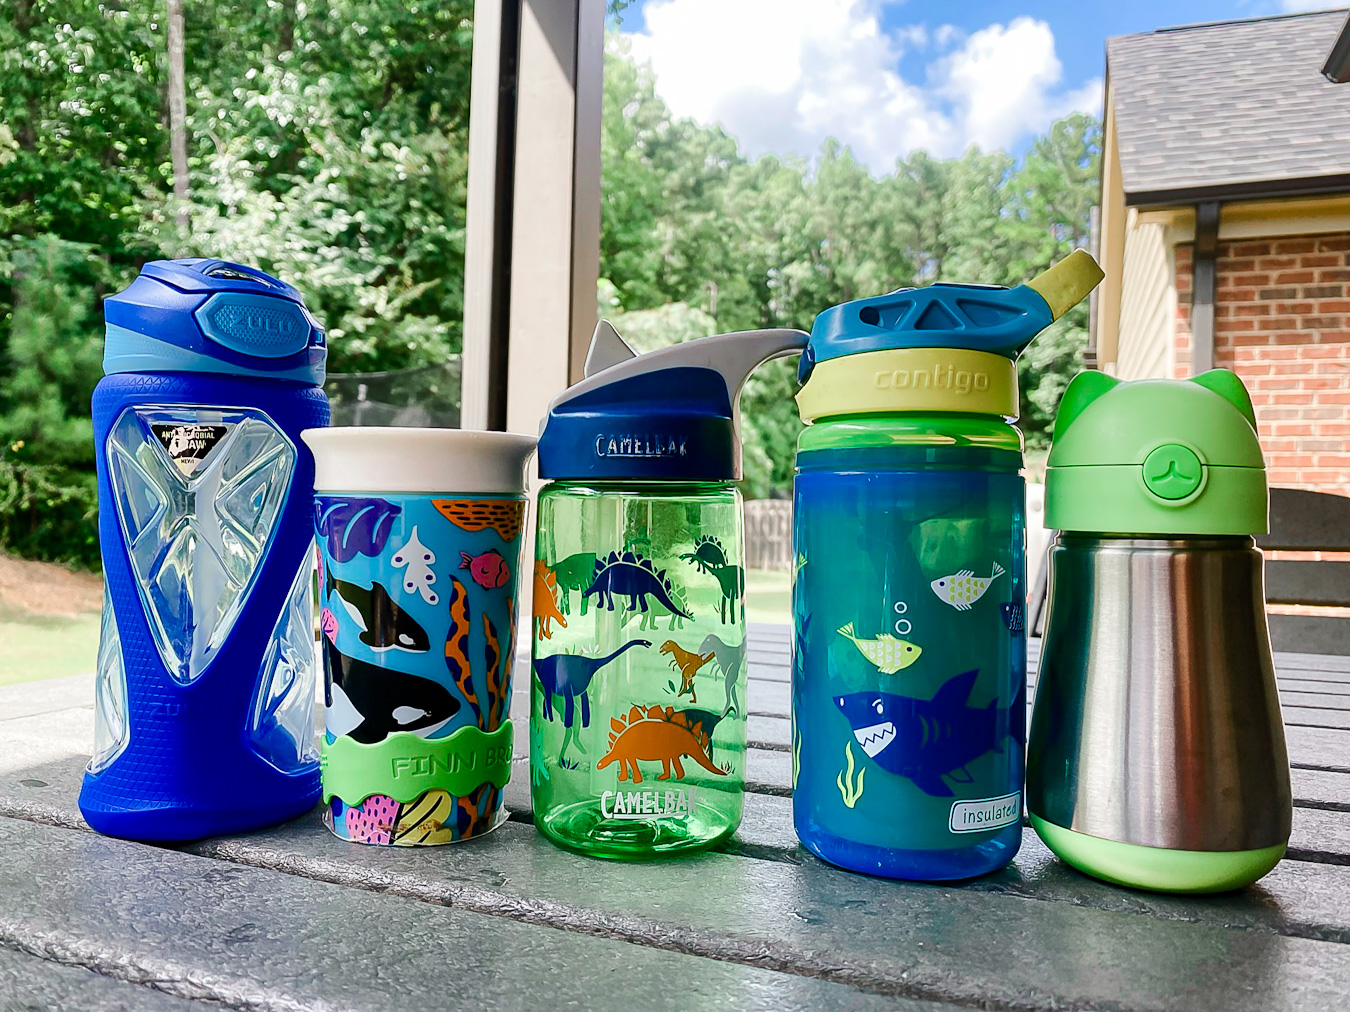 Best Water Bottles for Kids to Stay Hydrated - Healthy By Heather